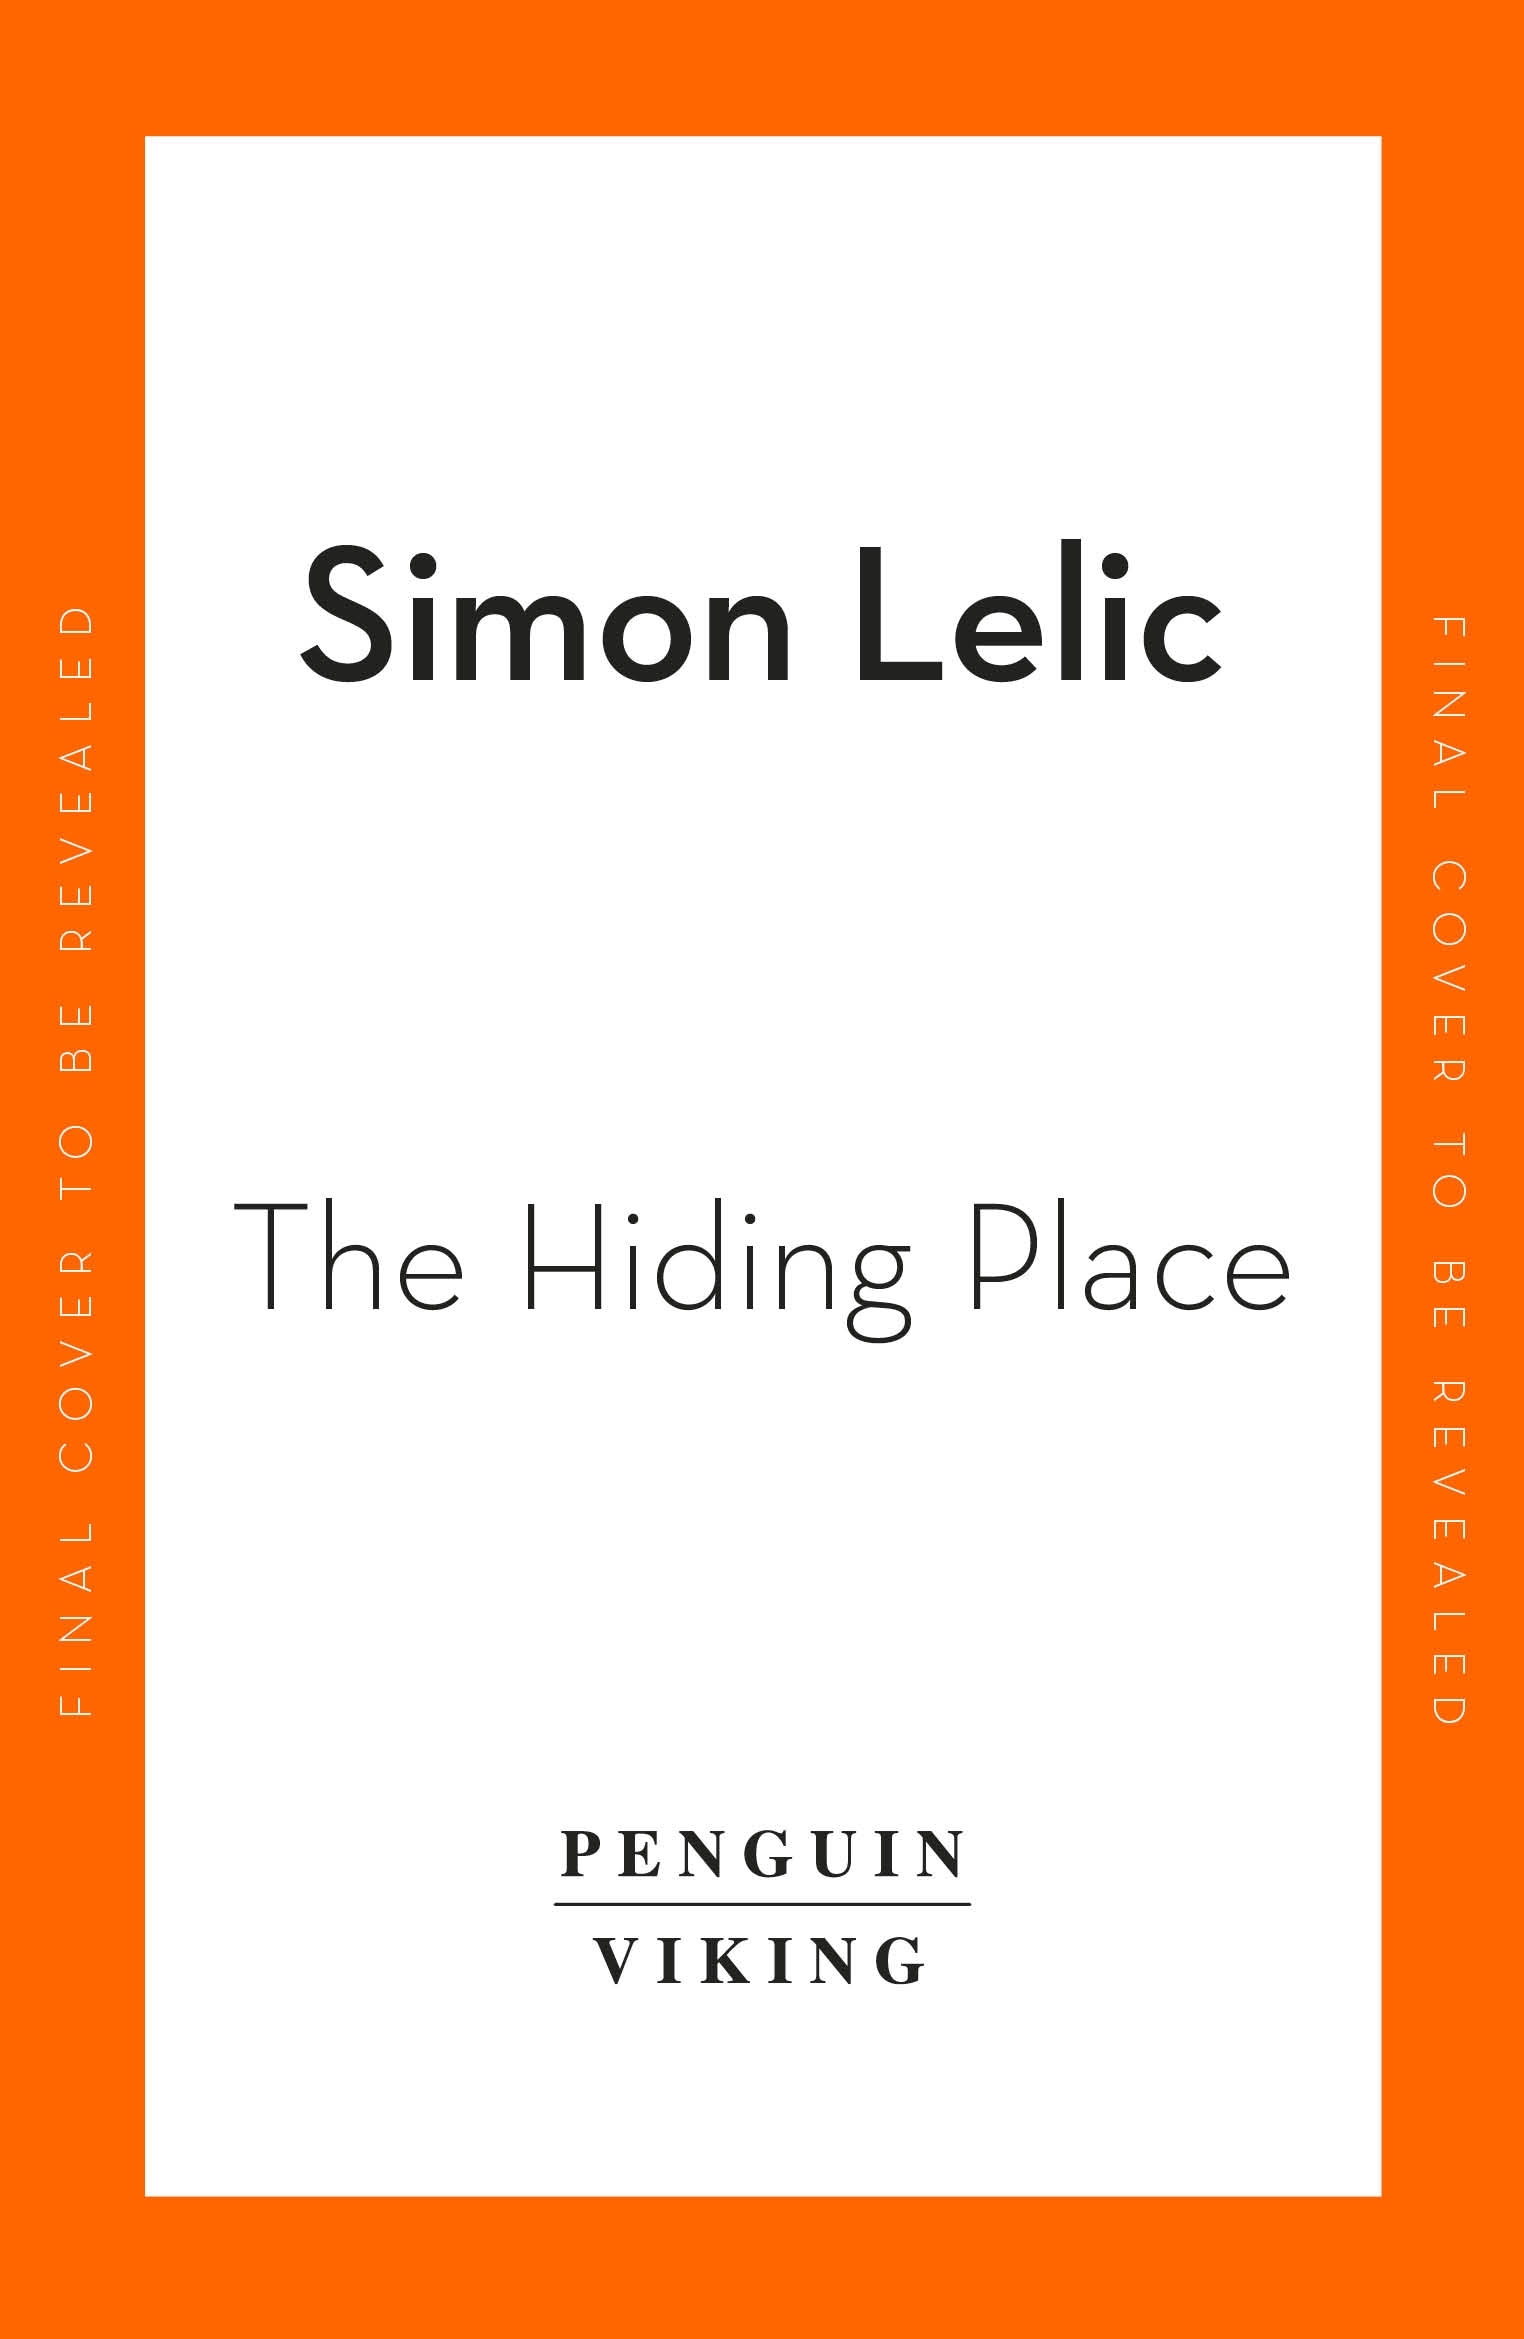 Book “The Hiding Place” by Simon Lelic — February 17, 2022